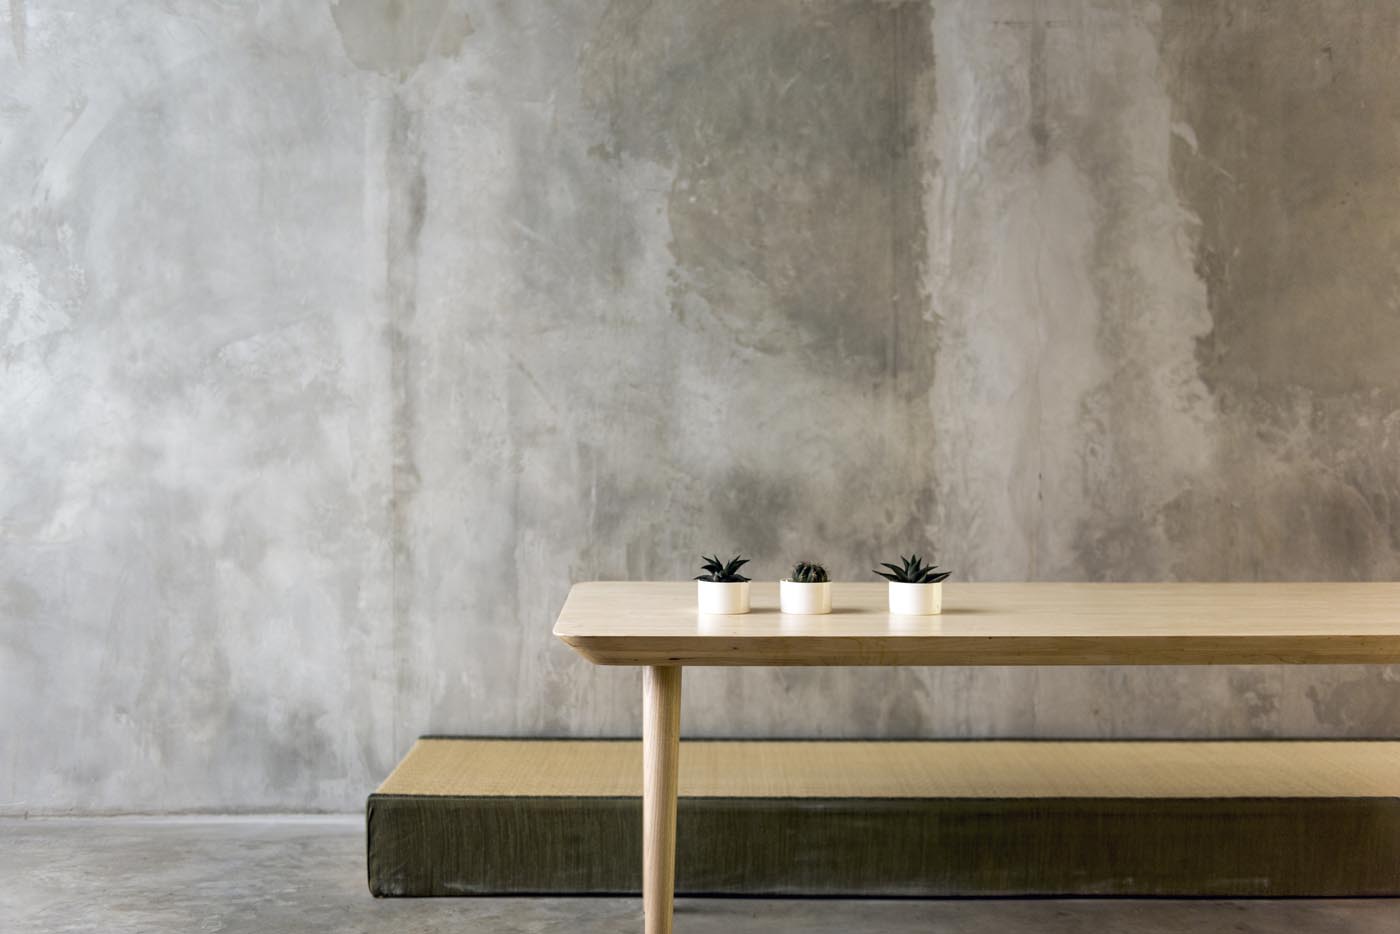 Japanese Minimalism Inspiration For Your Home